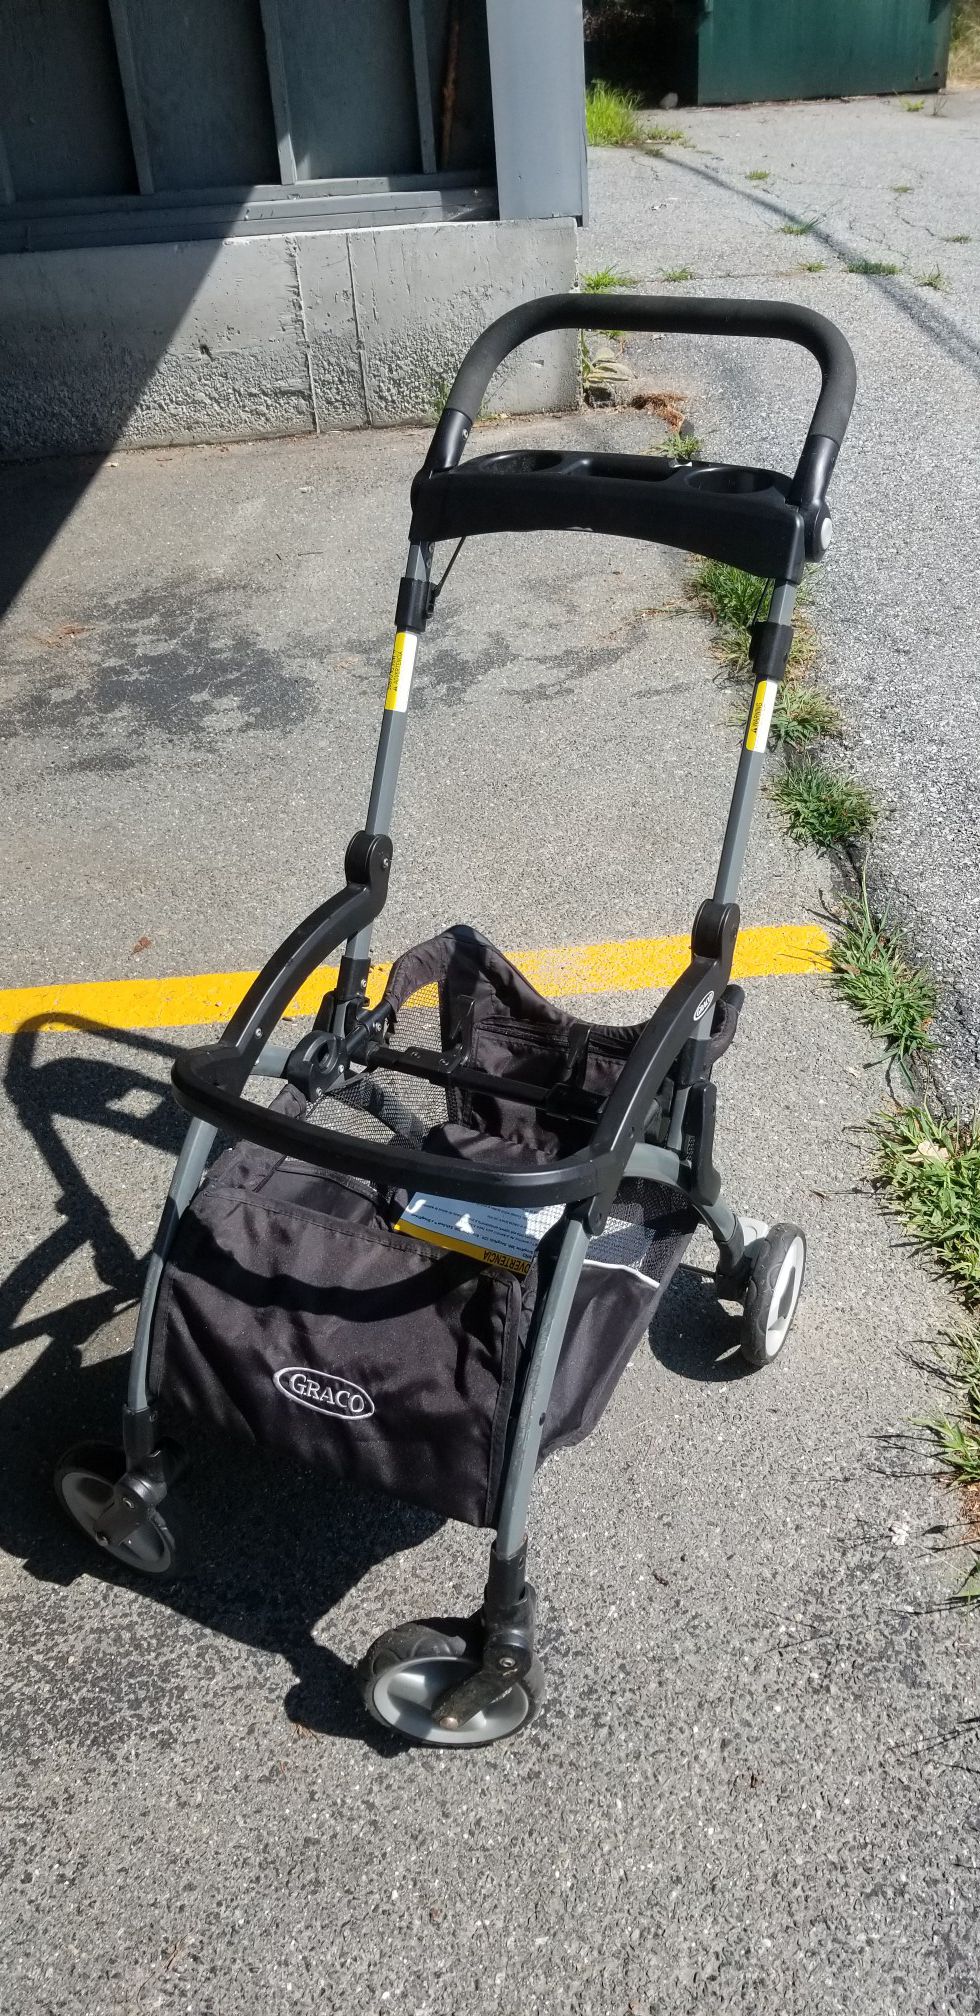 Graco click connect, classic connect stroller